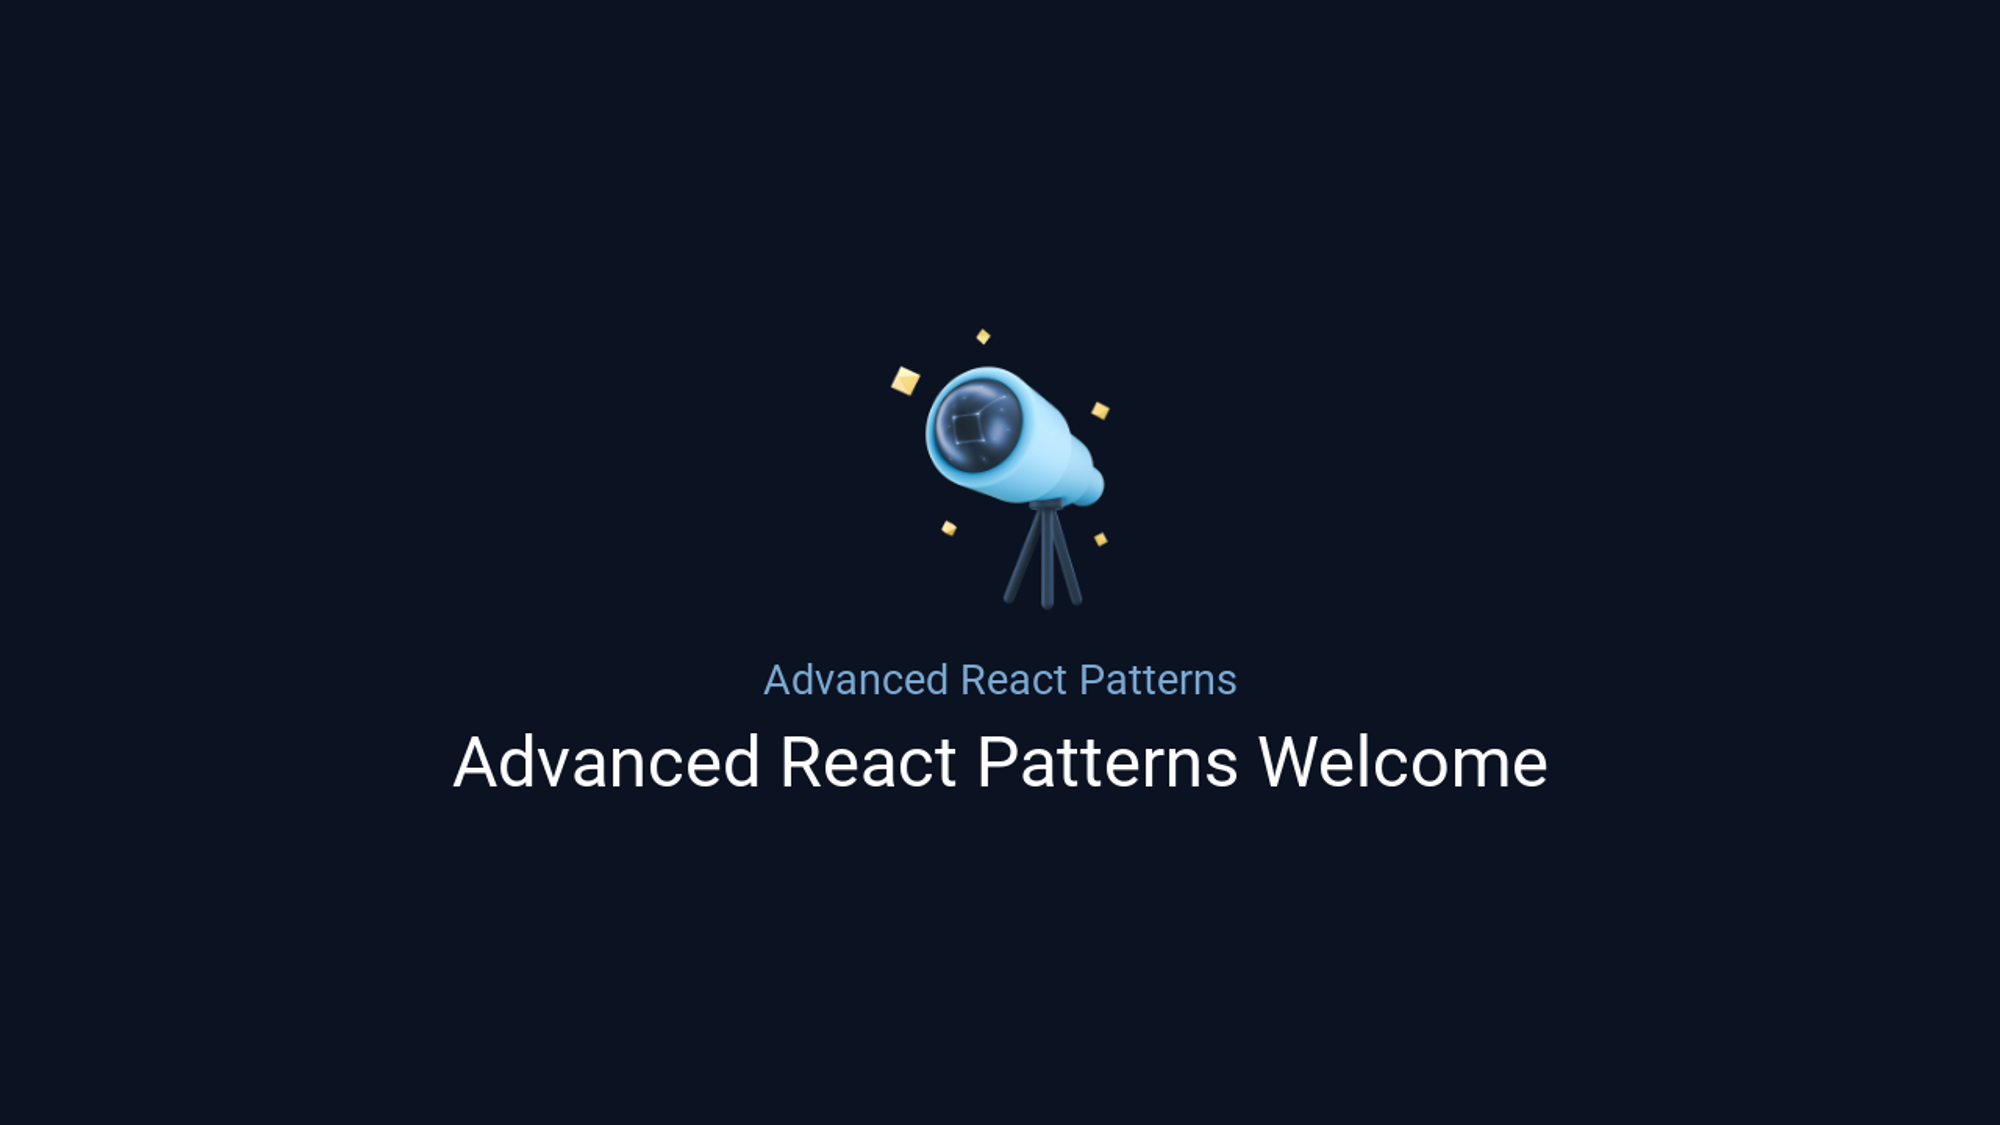 Advanced React Patterns: Advanced React Patterns Welcome